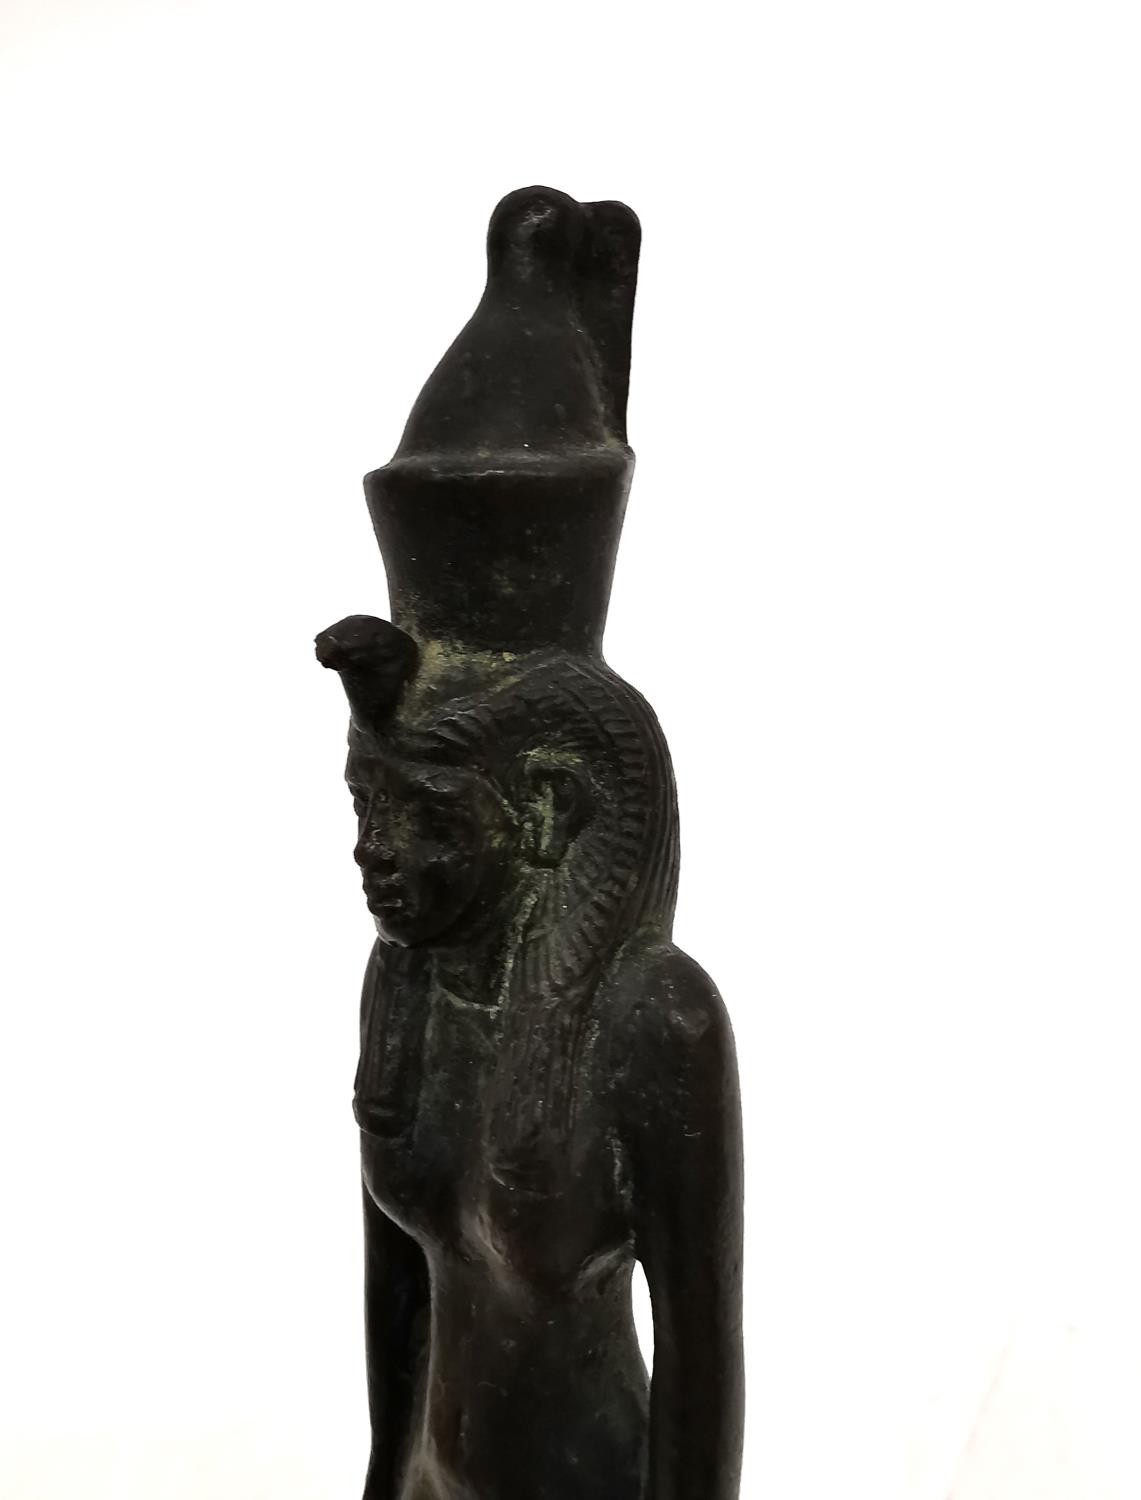 A 19th century Egyptian style bronze statue of an Egyptian god mounted on a wooden stand. H.20cm. - Image 2 of 7